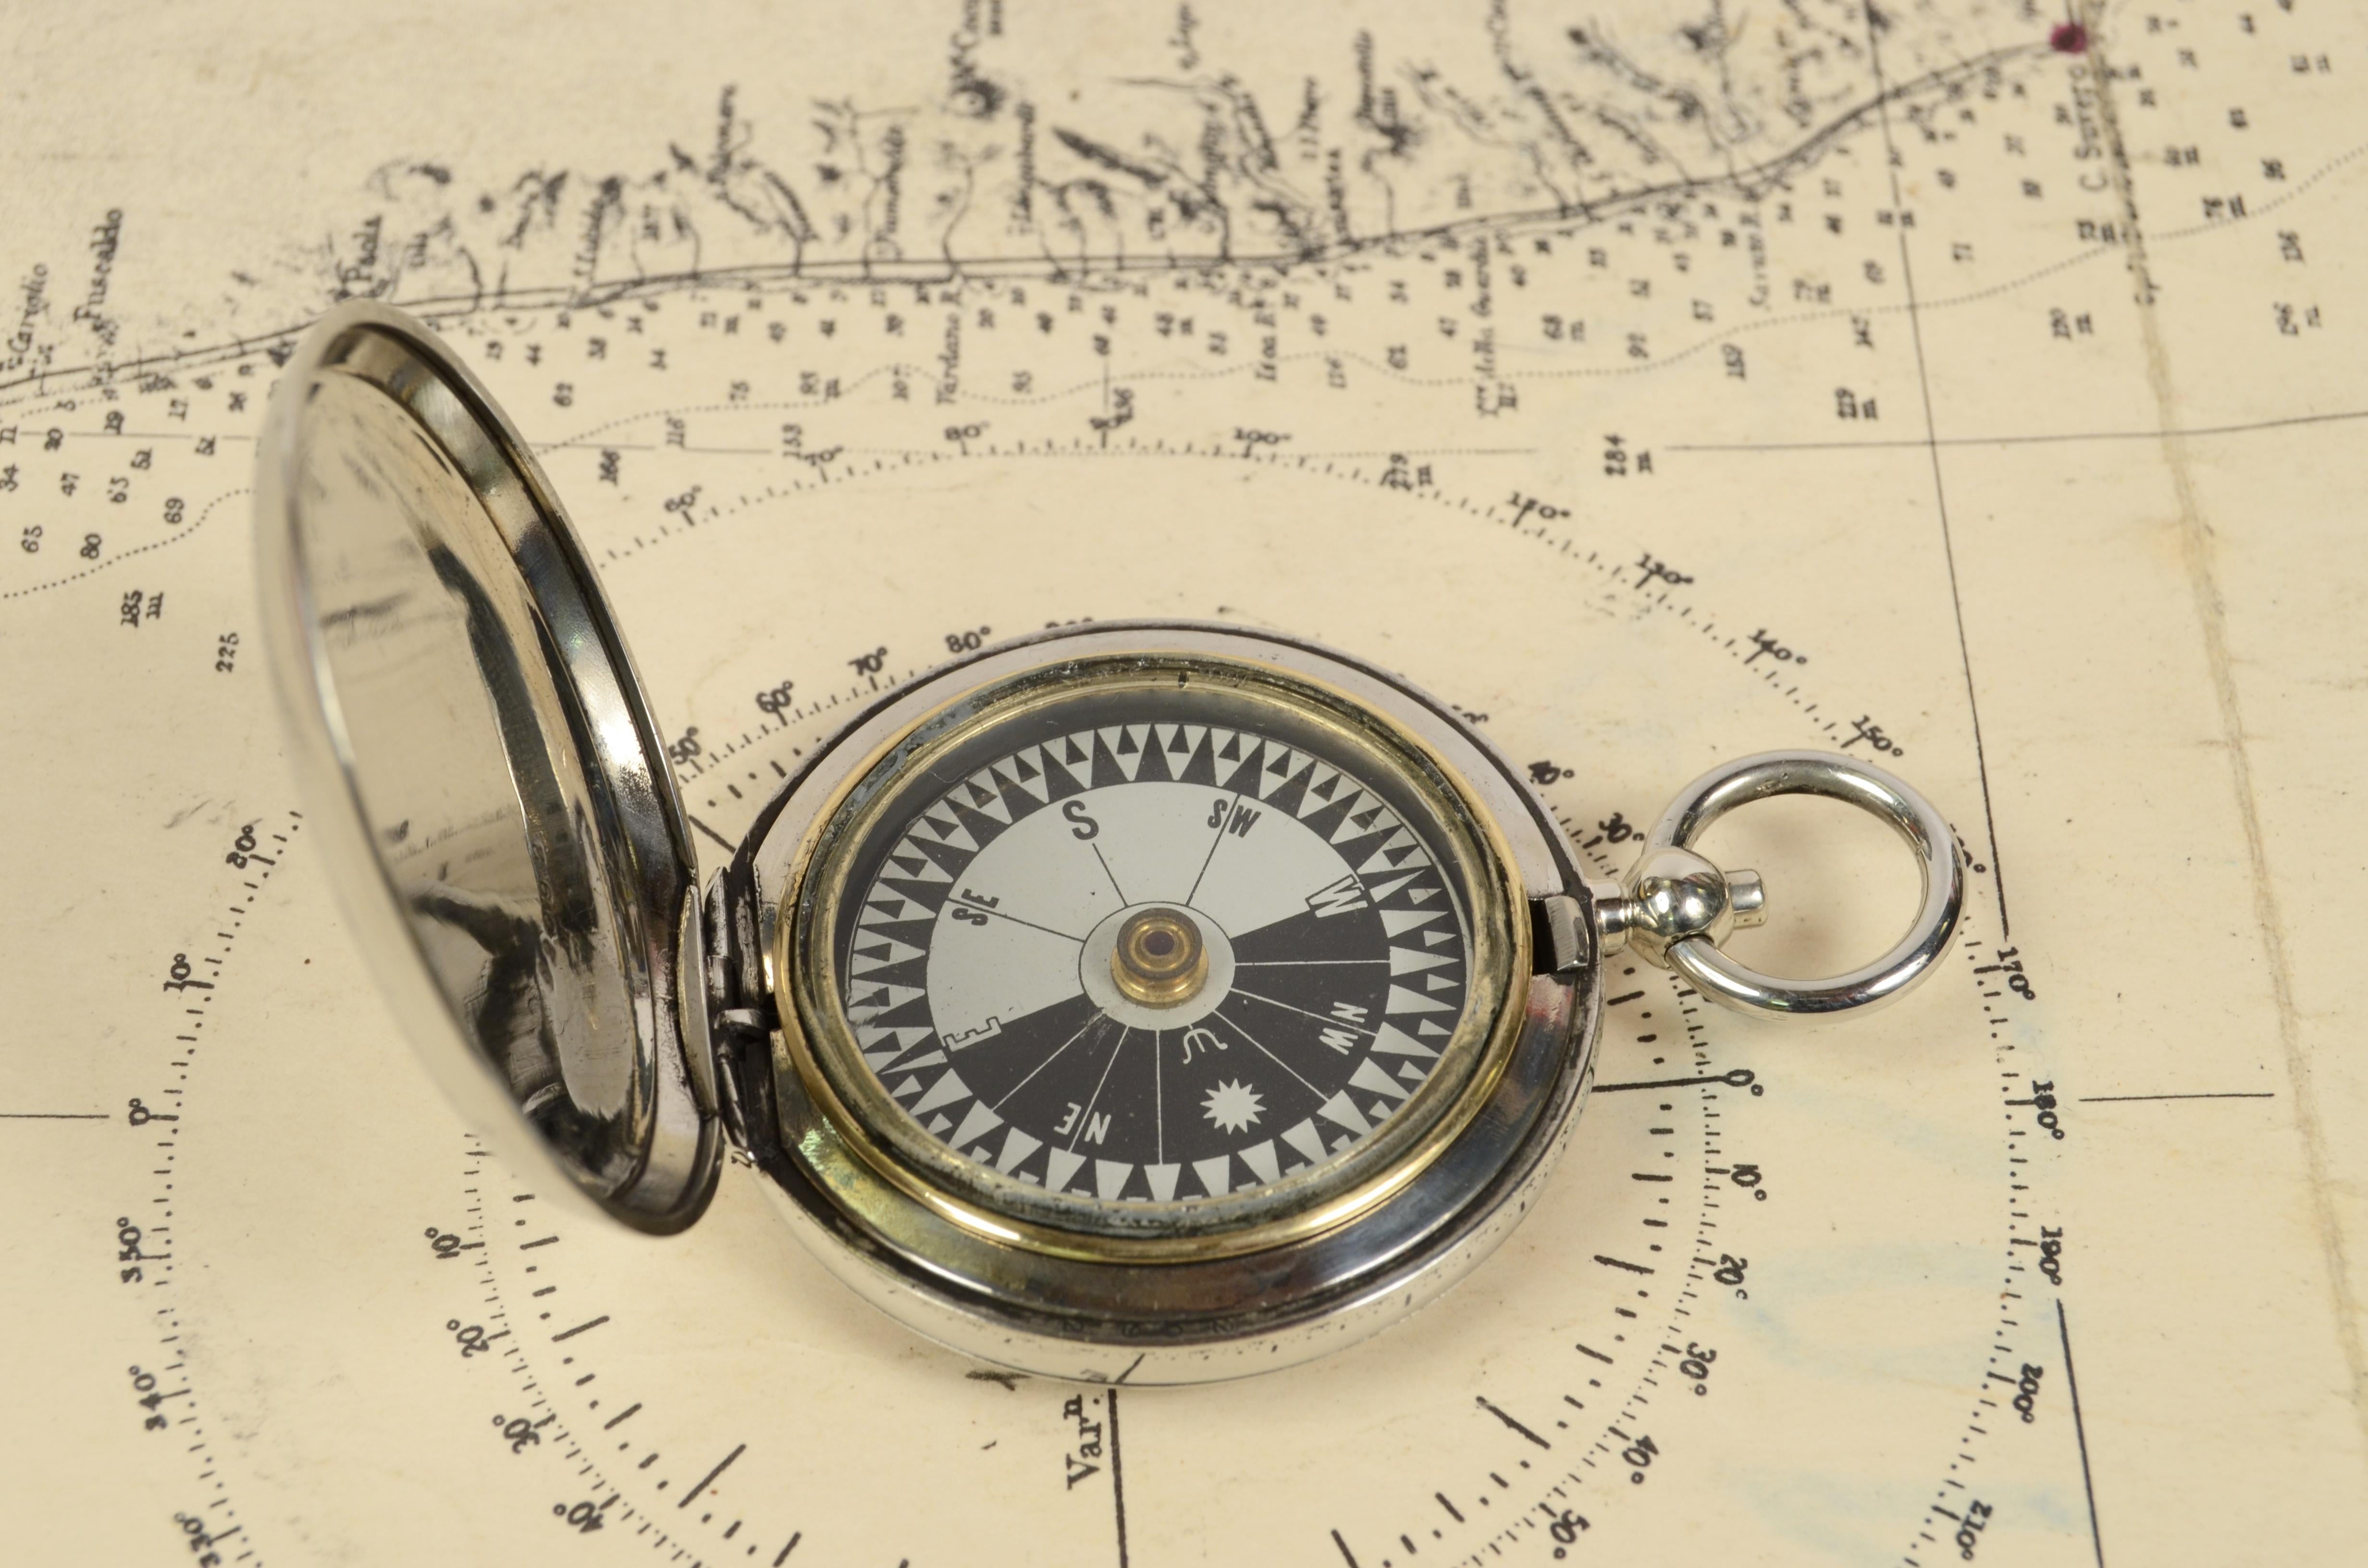 Pocket compass used by Britihs aviation officers made of chromed brass in the shape of a pocket watch, signed Dennison Birmingham V 104766 of 1916. The compass has a lid with snap closure with release button inside of the ring. Eight-winds compass